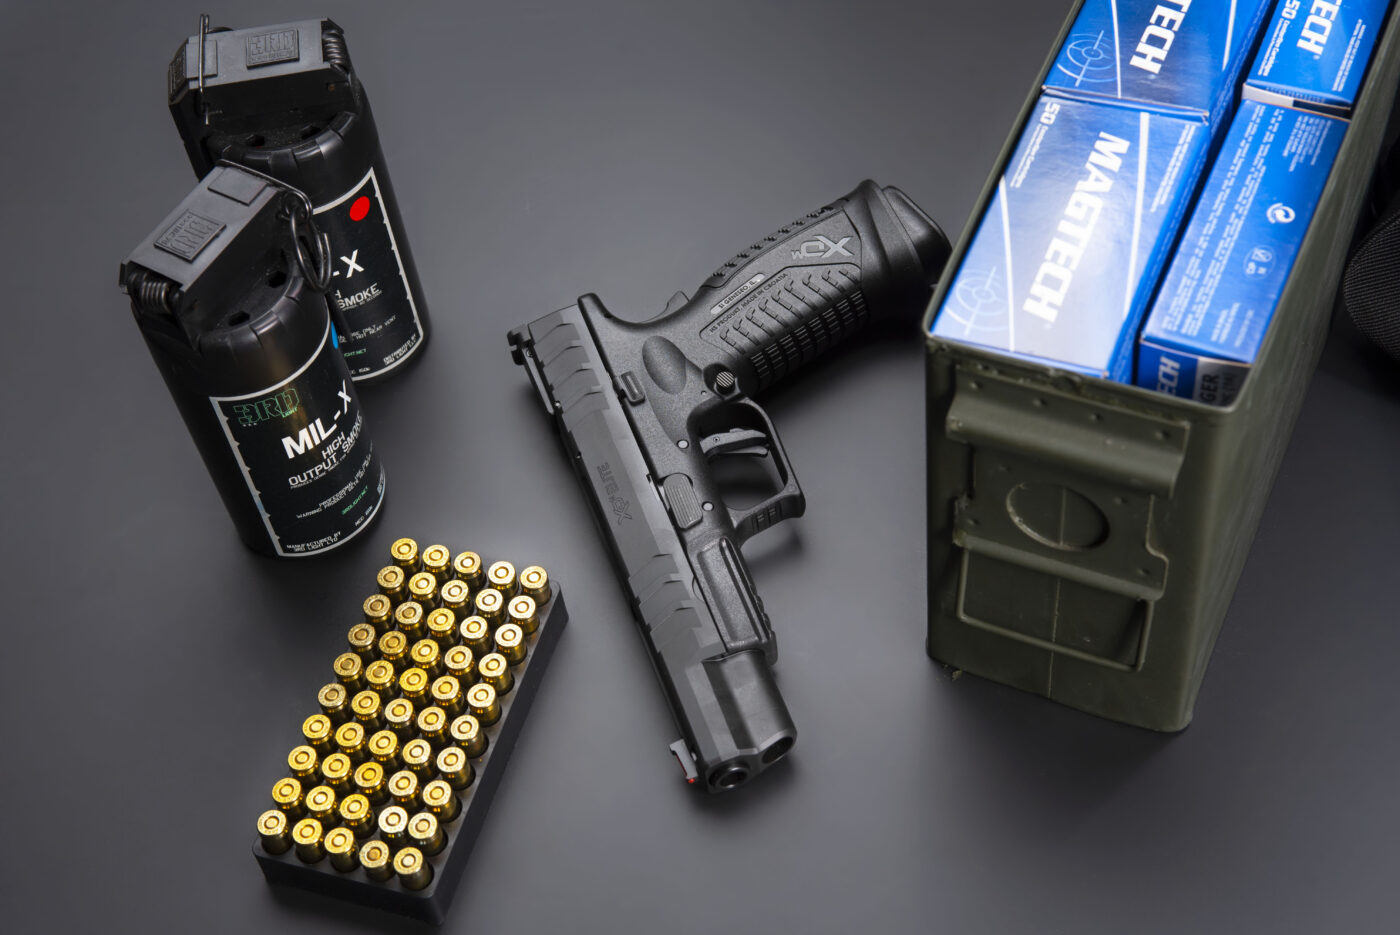 Springfield XD-M Elite pistol in 9mm with ammo